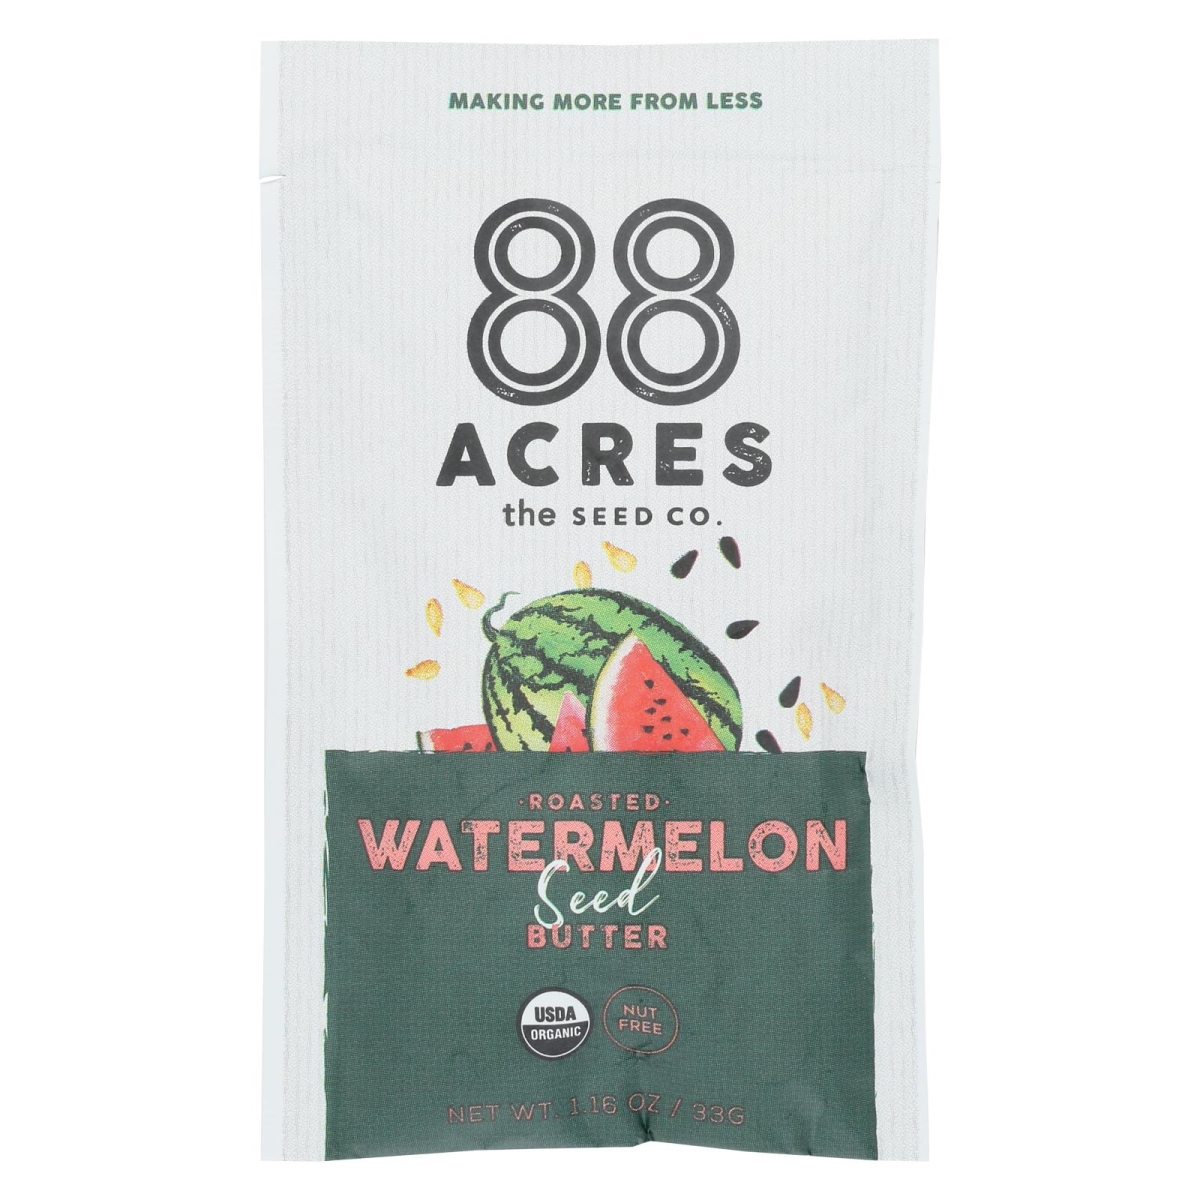 Picture of 88 Acres 2410629 1.16 oz Organic Watermelon Butter Seeds